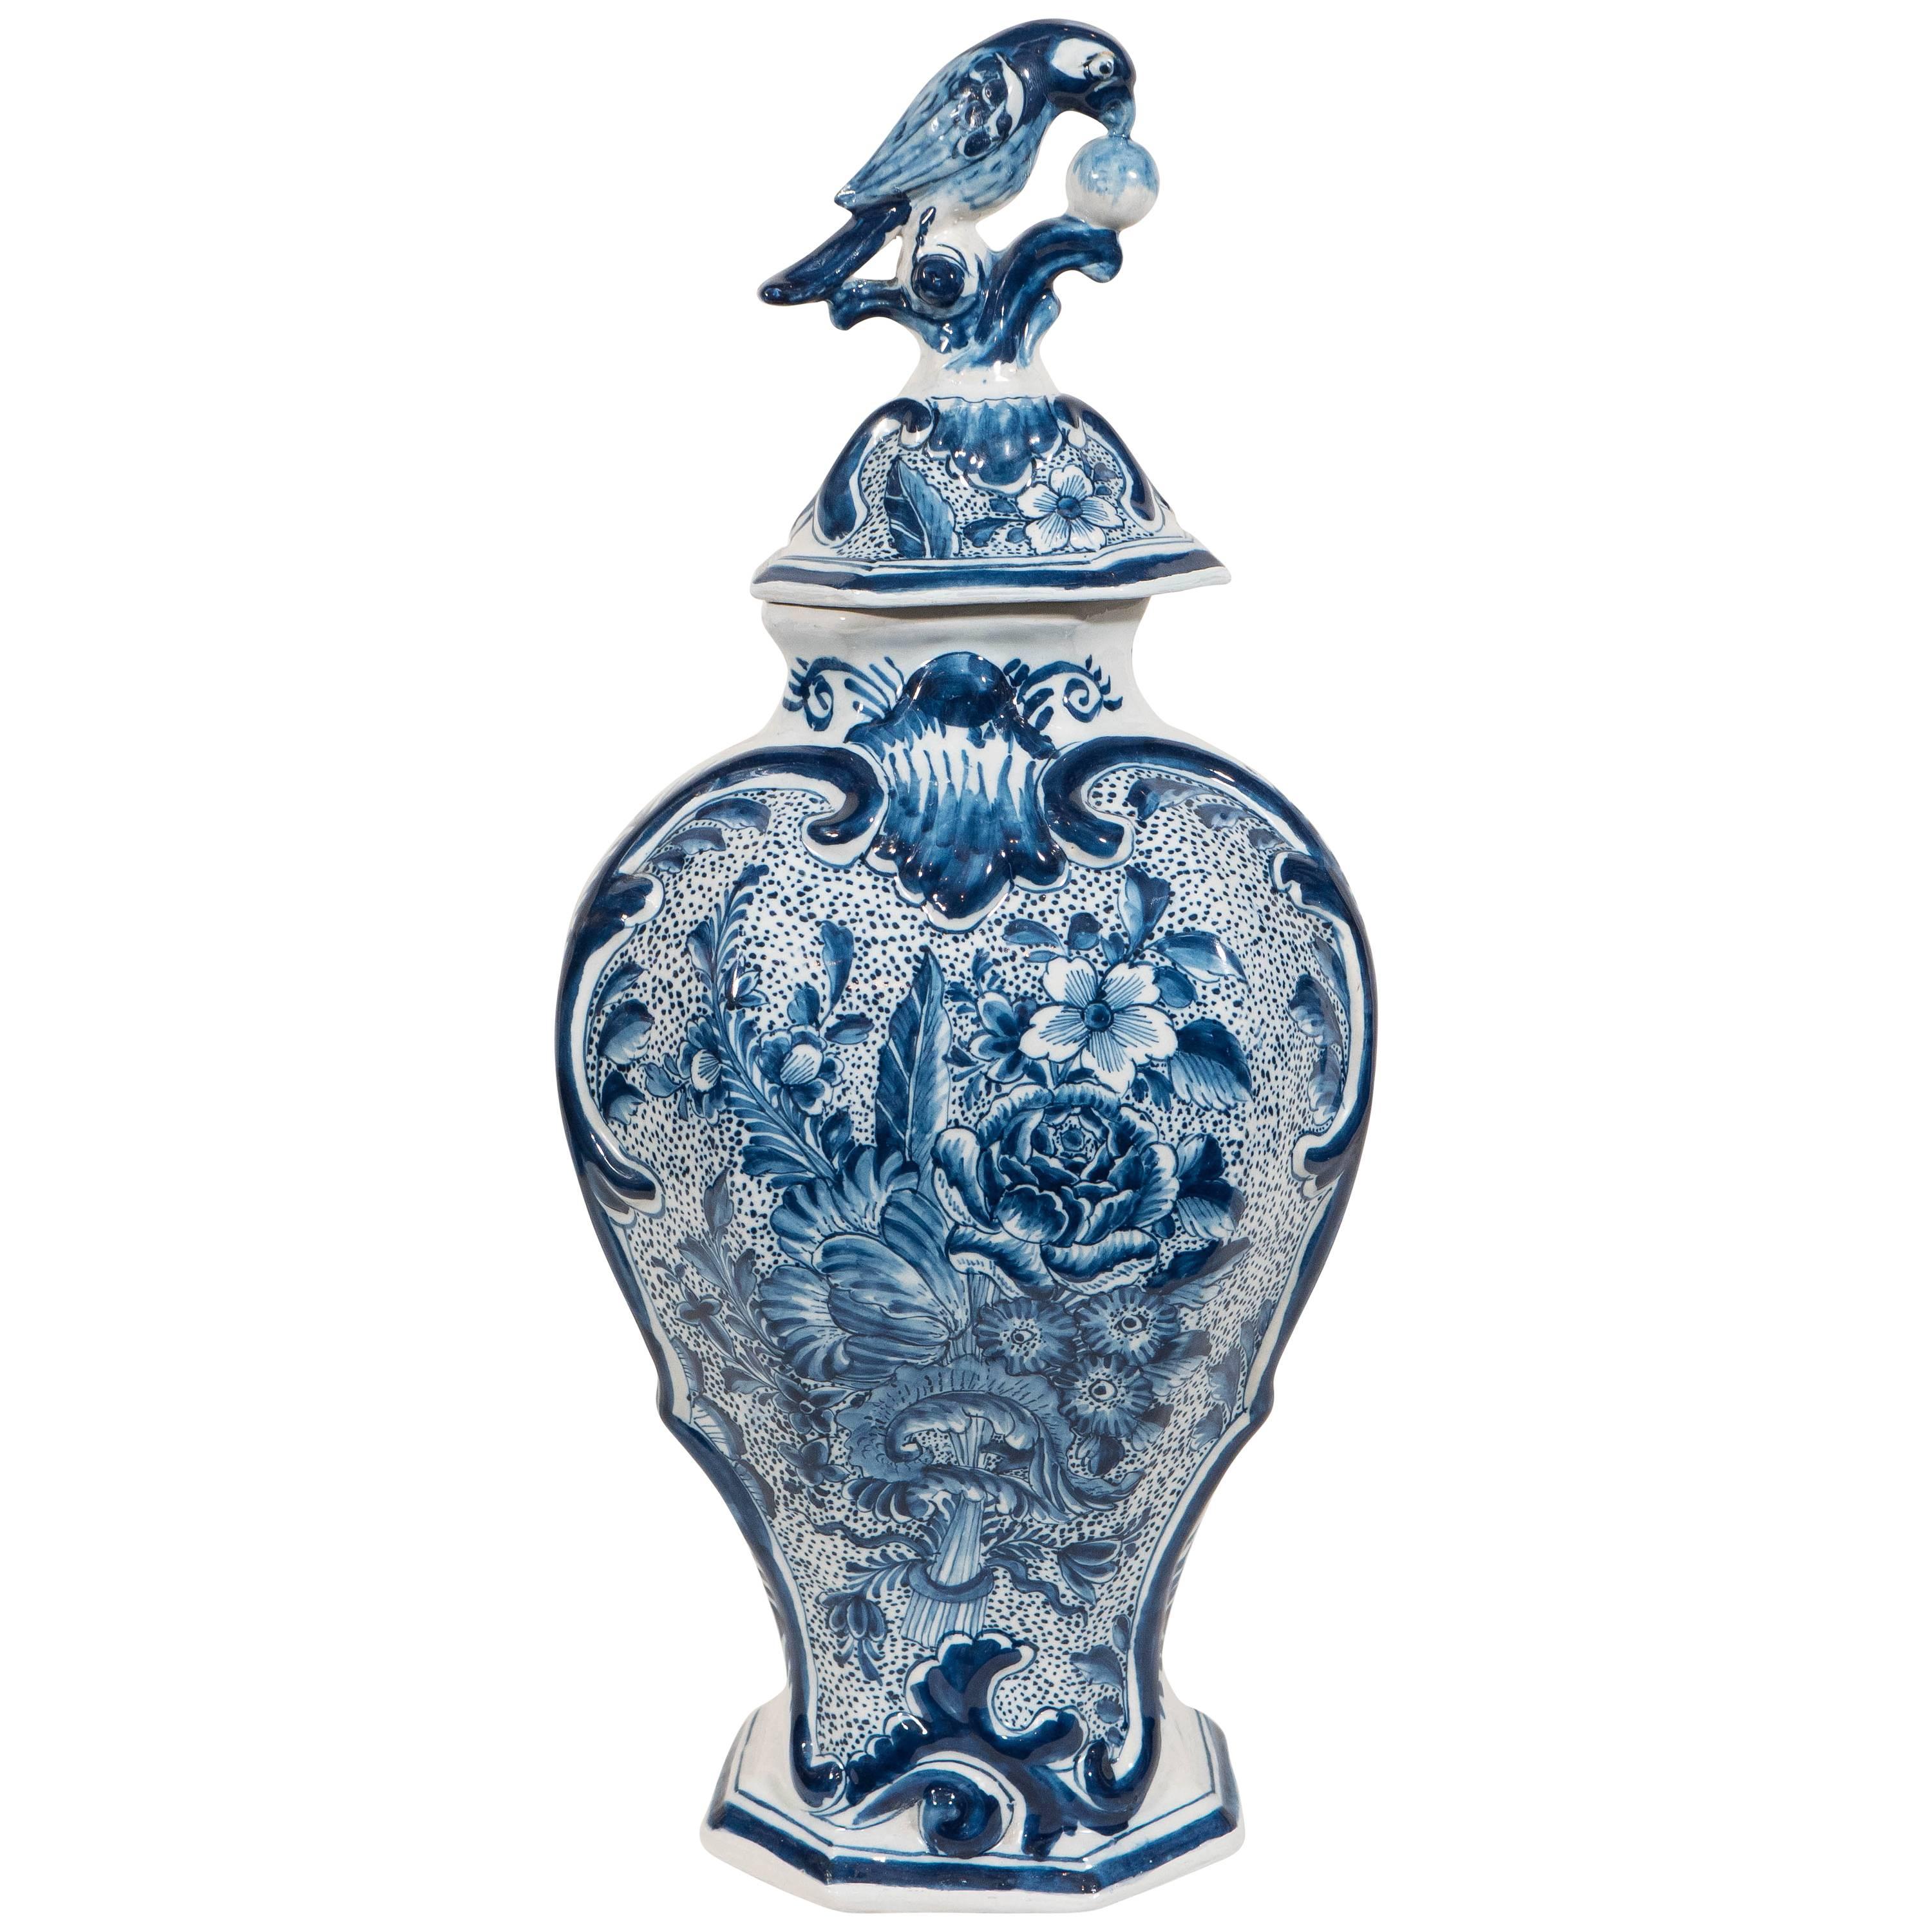  Dutch Delft Blue and White Covered Vase Made circa 1830